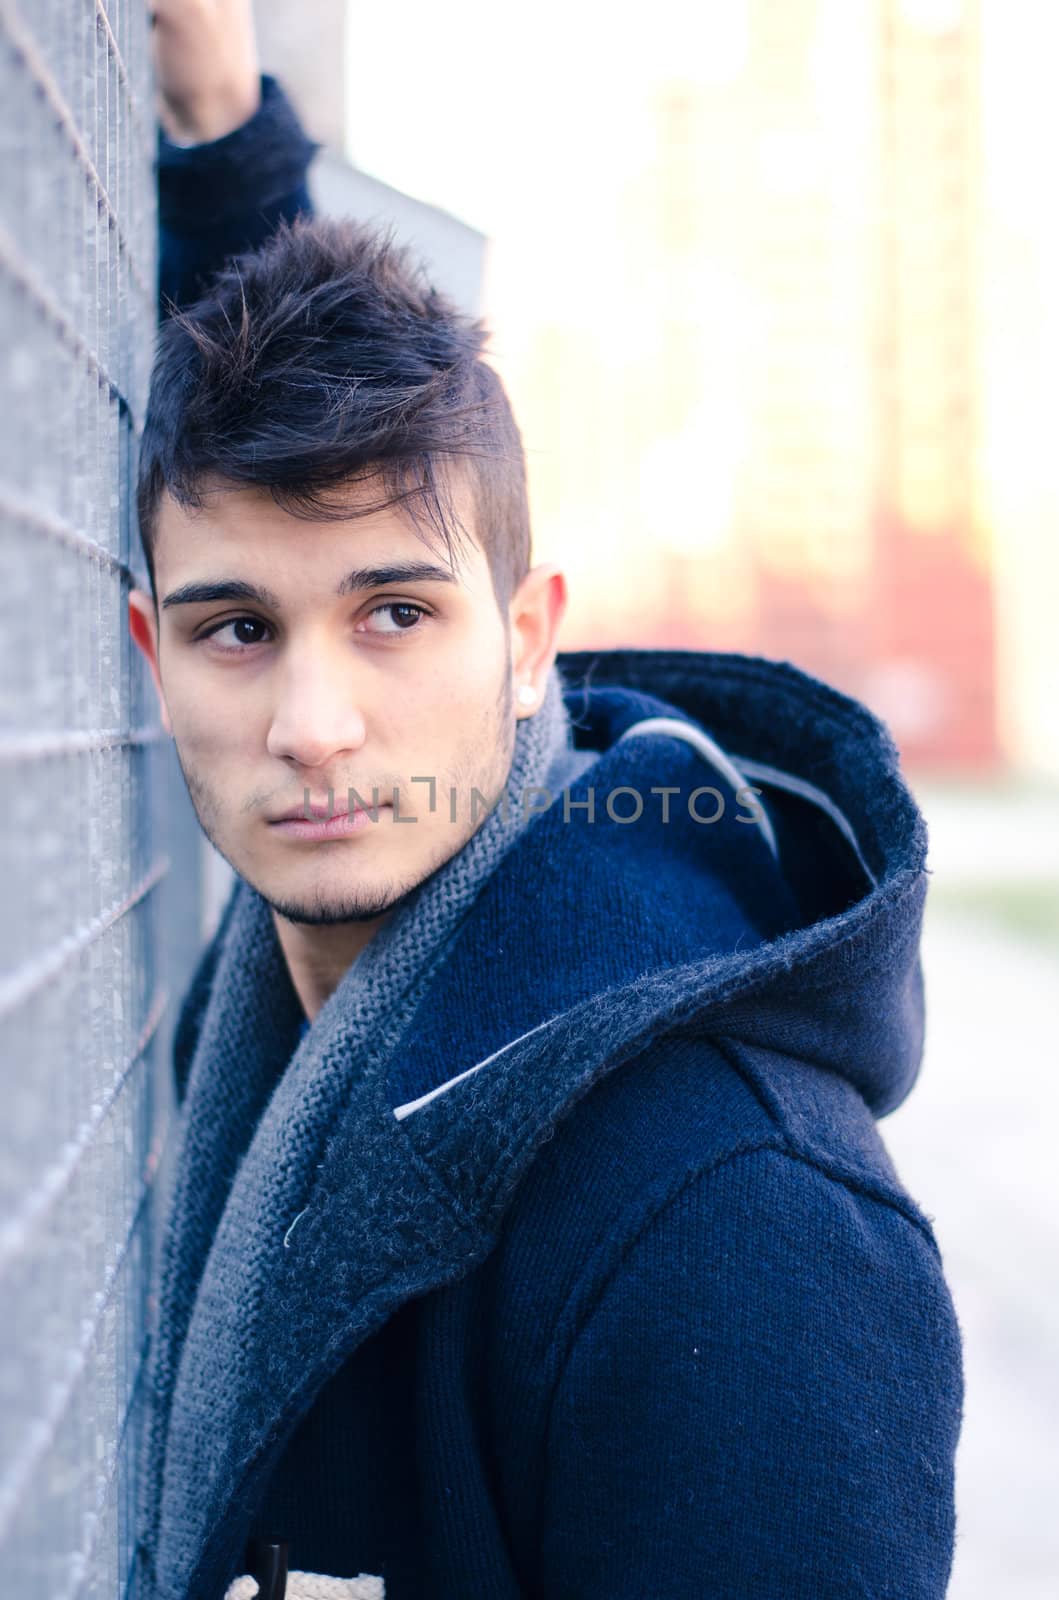 Young man in urban environment against metal grid by artofphoto